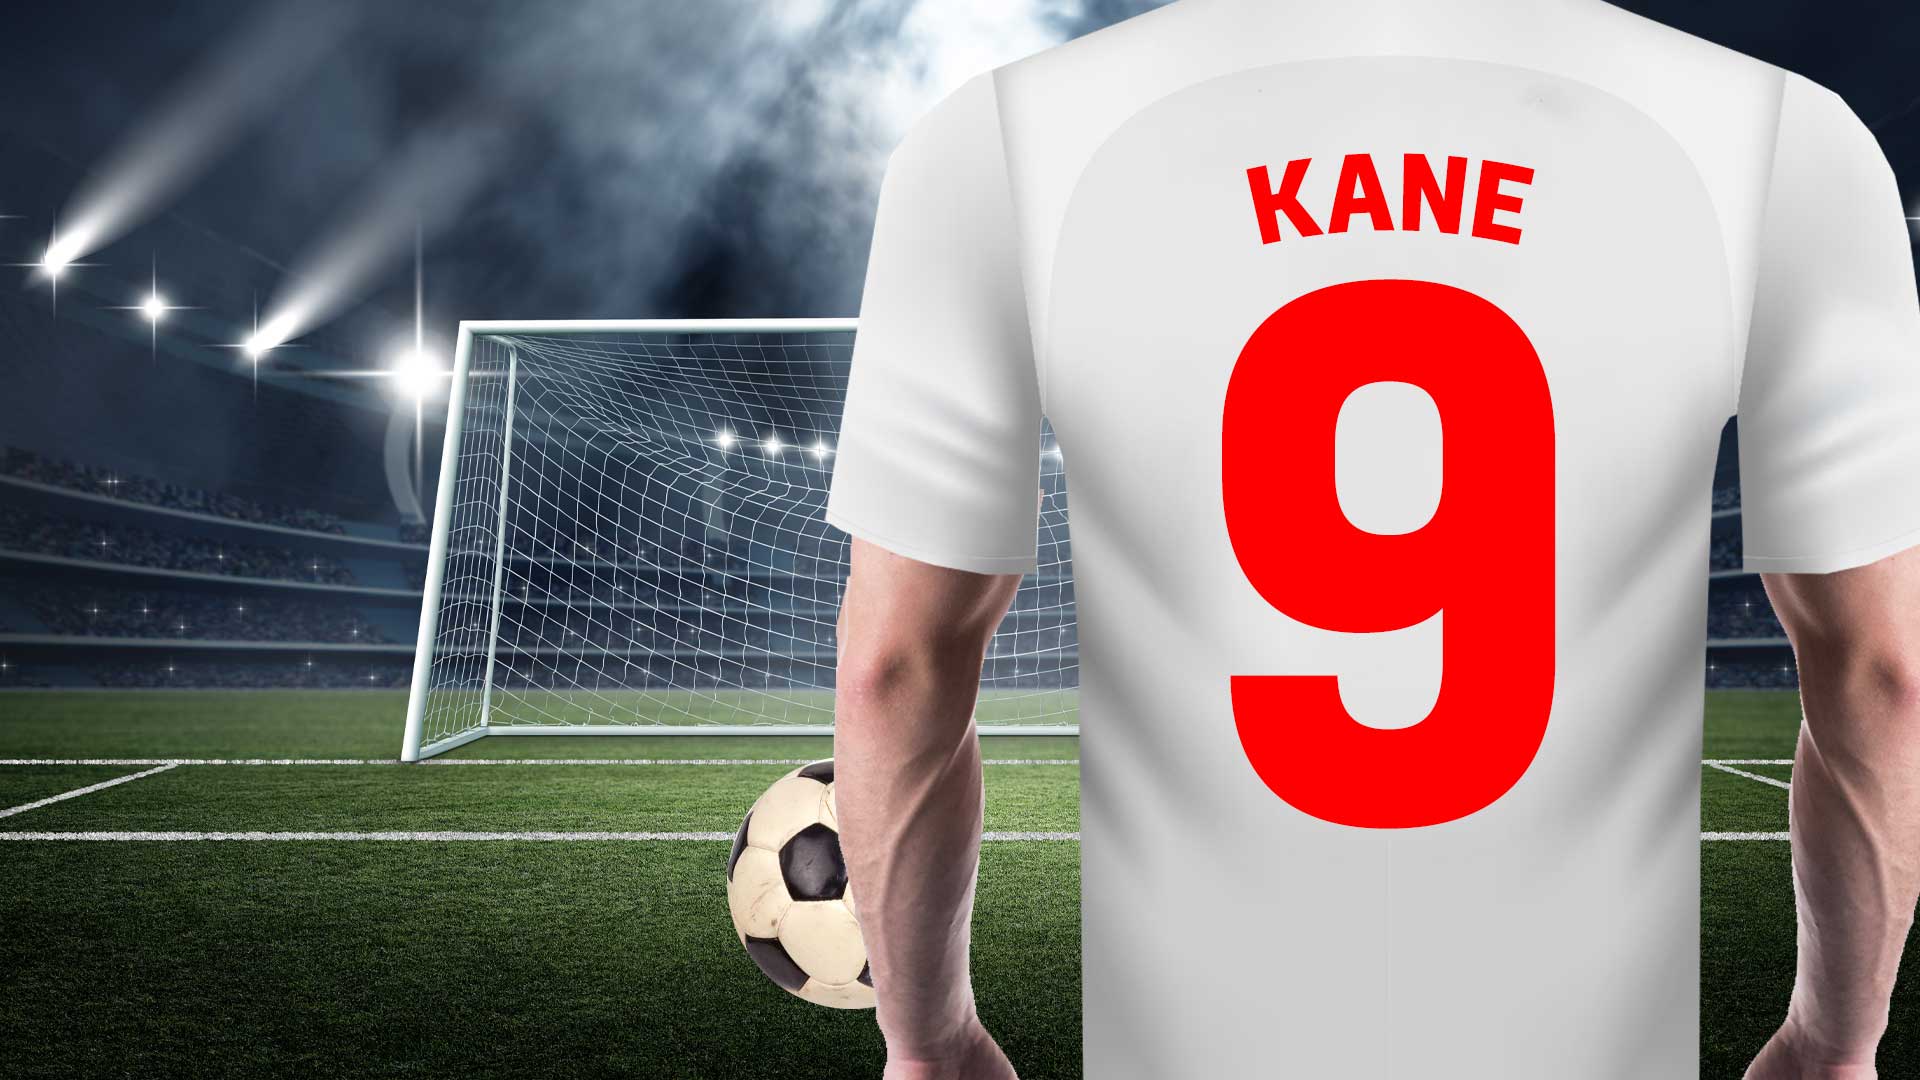 A football shirt showing the name Kane and the number 9